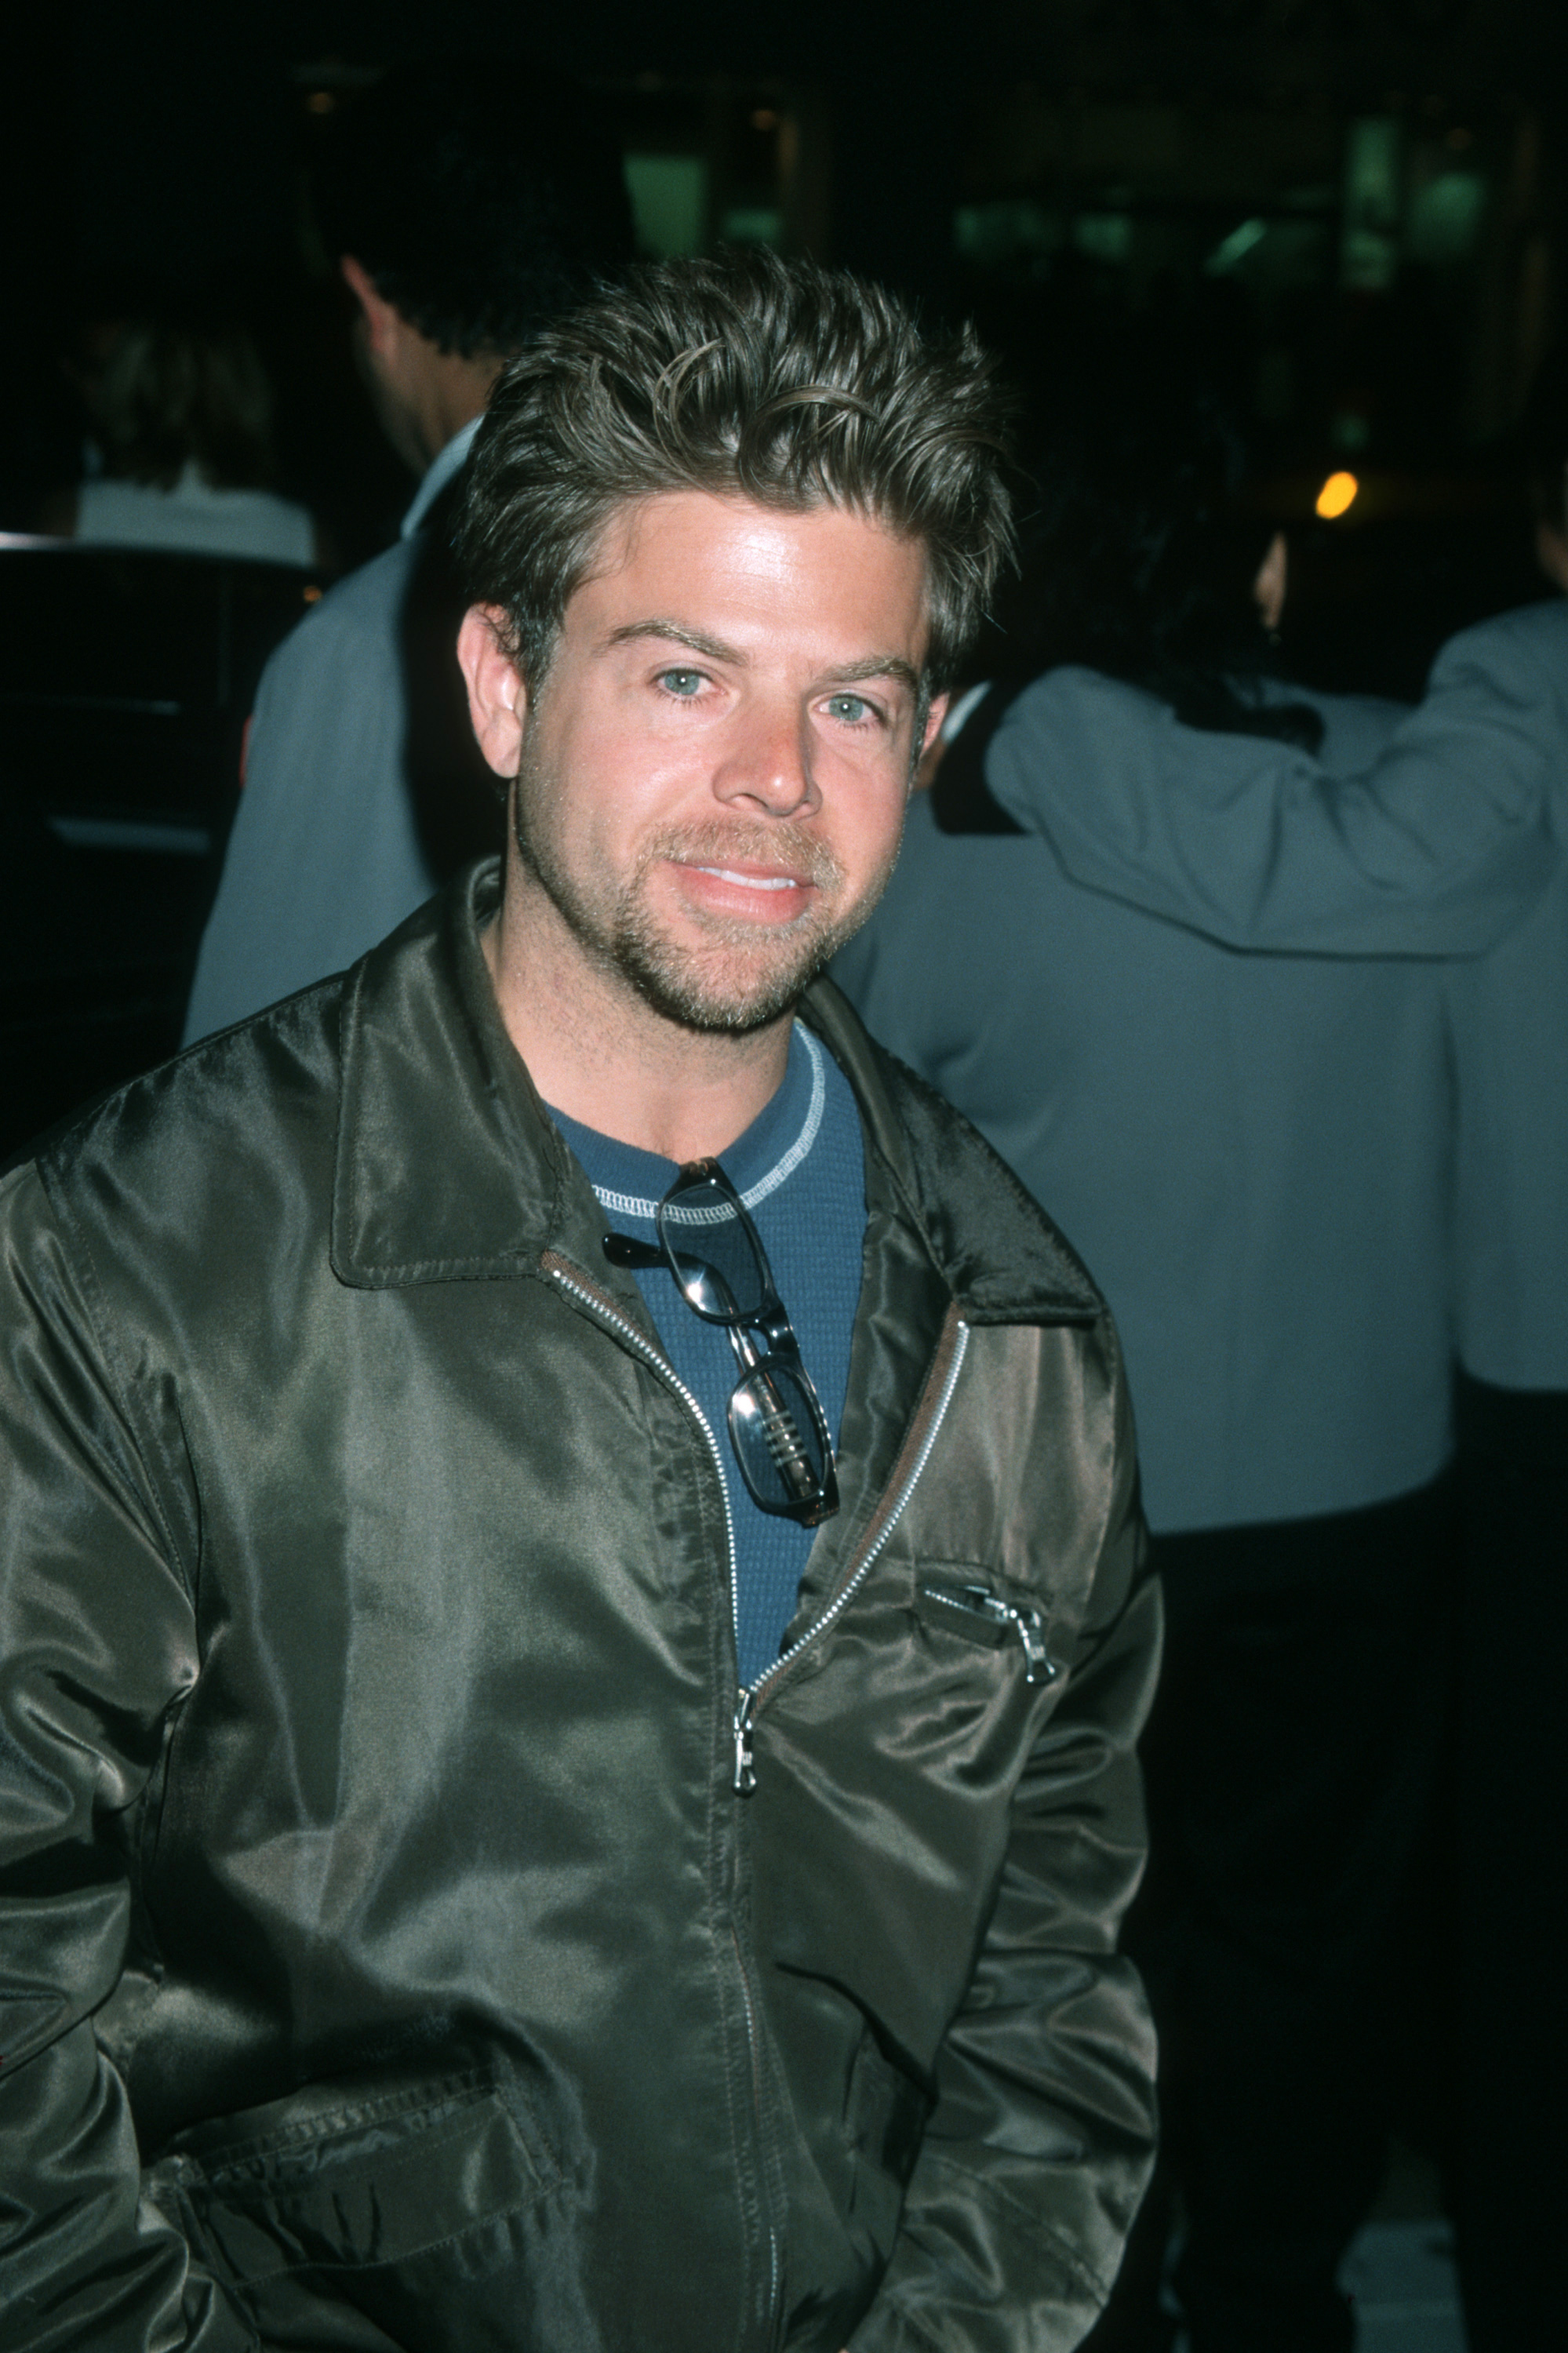 Adam Rich during Hilfiger and Vanity Fair Celebrate "Icons of Rock" Party at Tommy Hilfiger Store on November 11, 1999 in Beverly Hills, California | Source: Getty Images